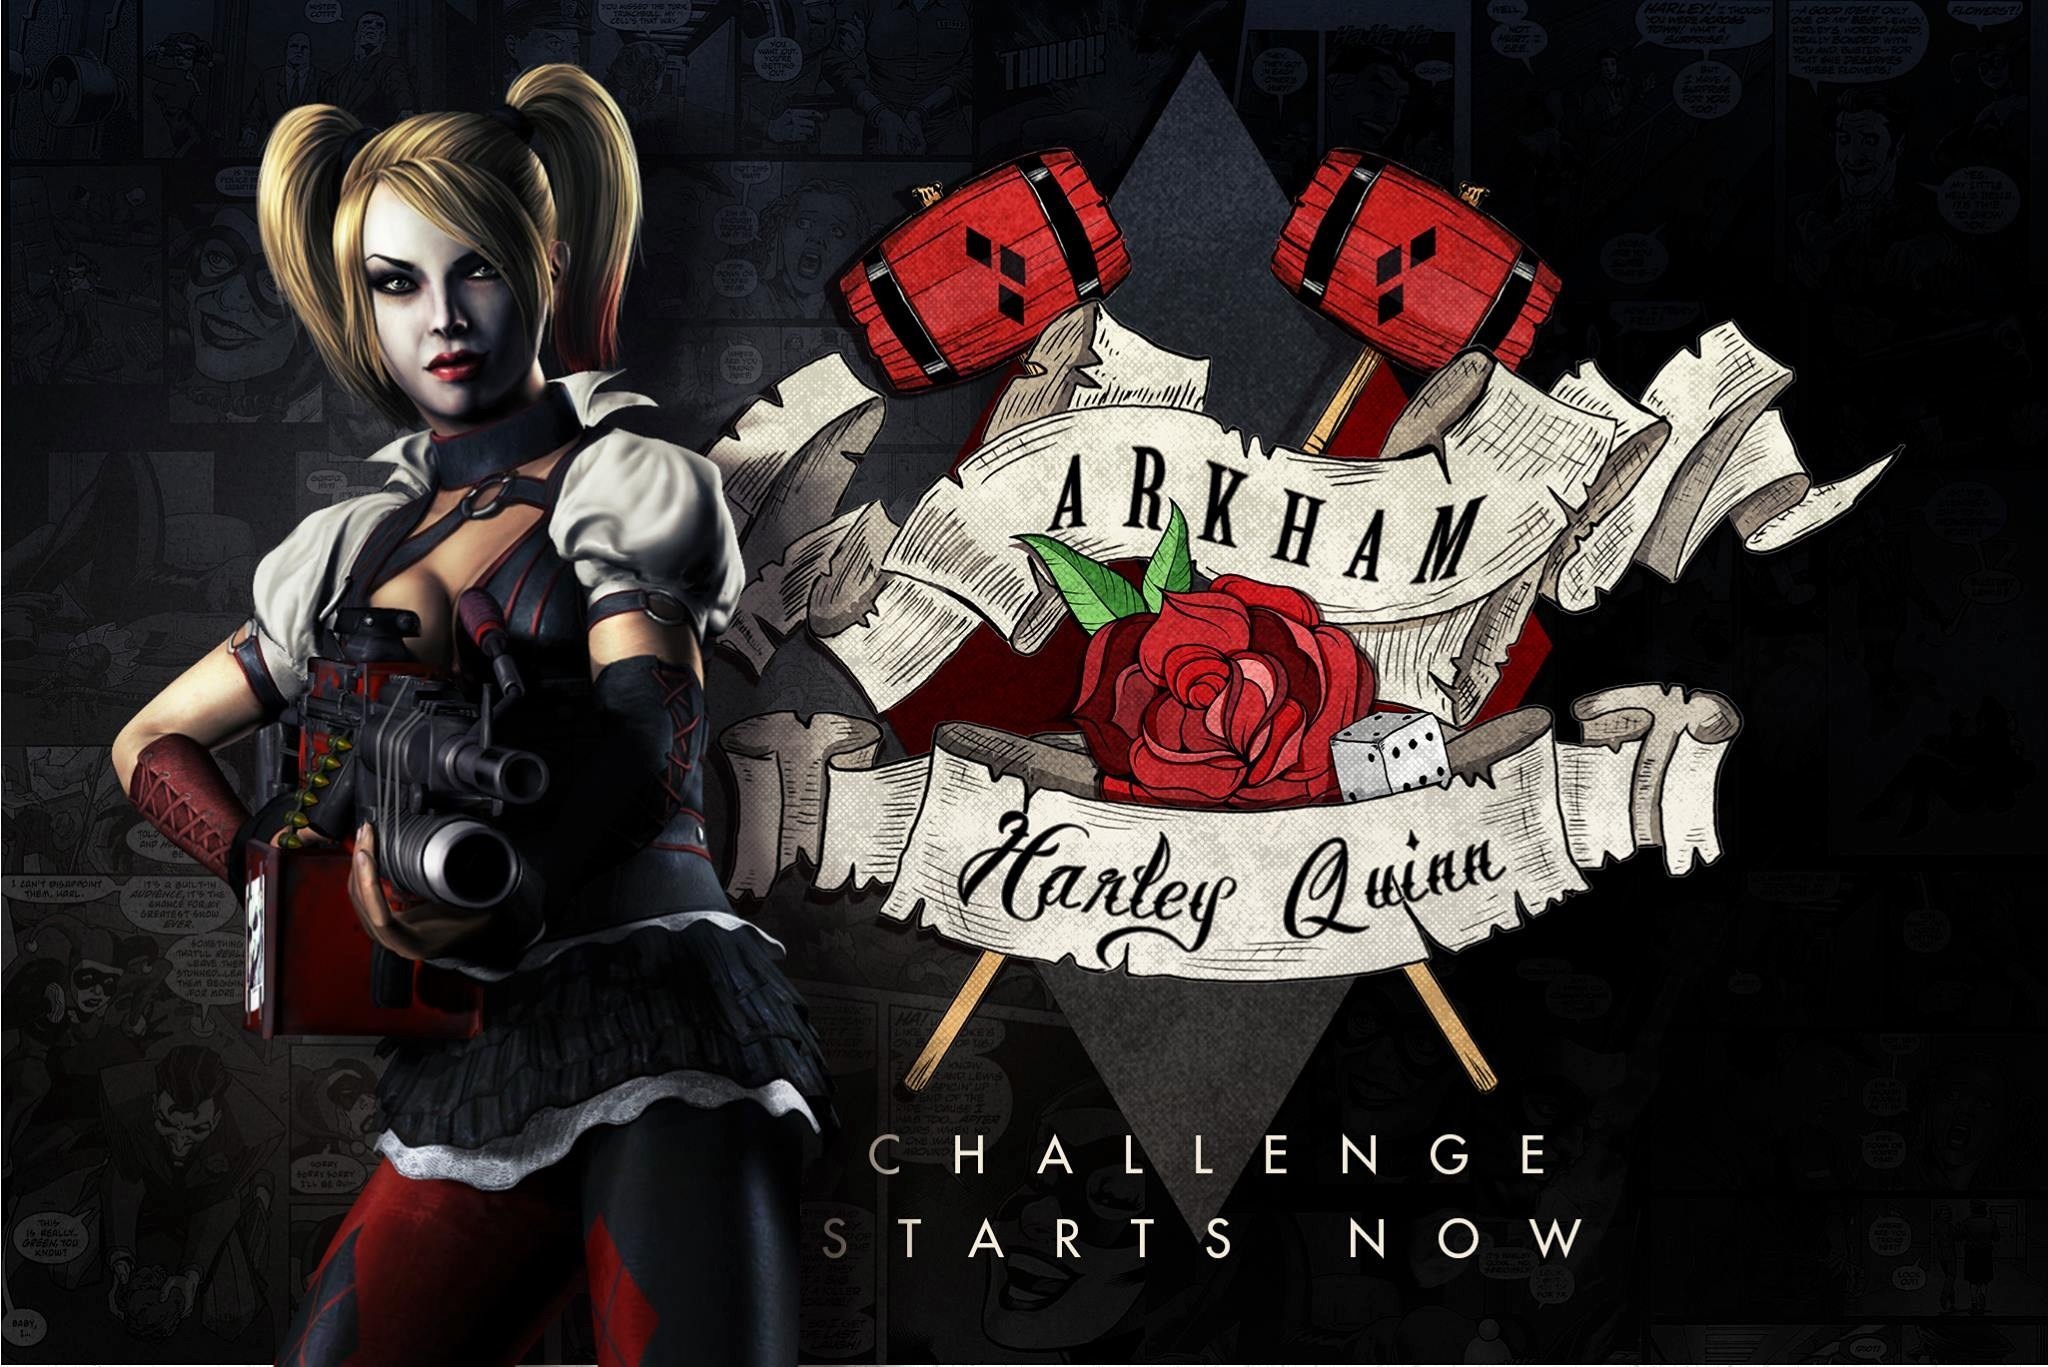 2048x1367 Harley Quinn Background Wallpaper Free  484 Kb By